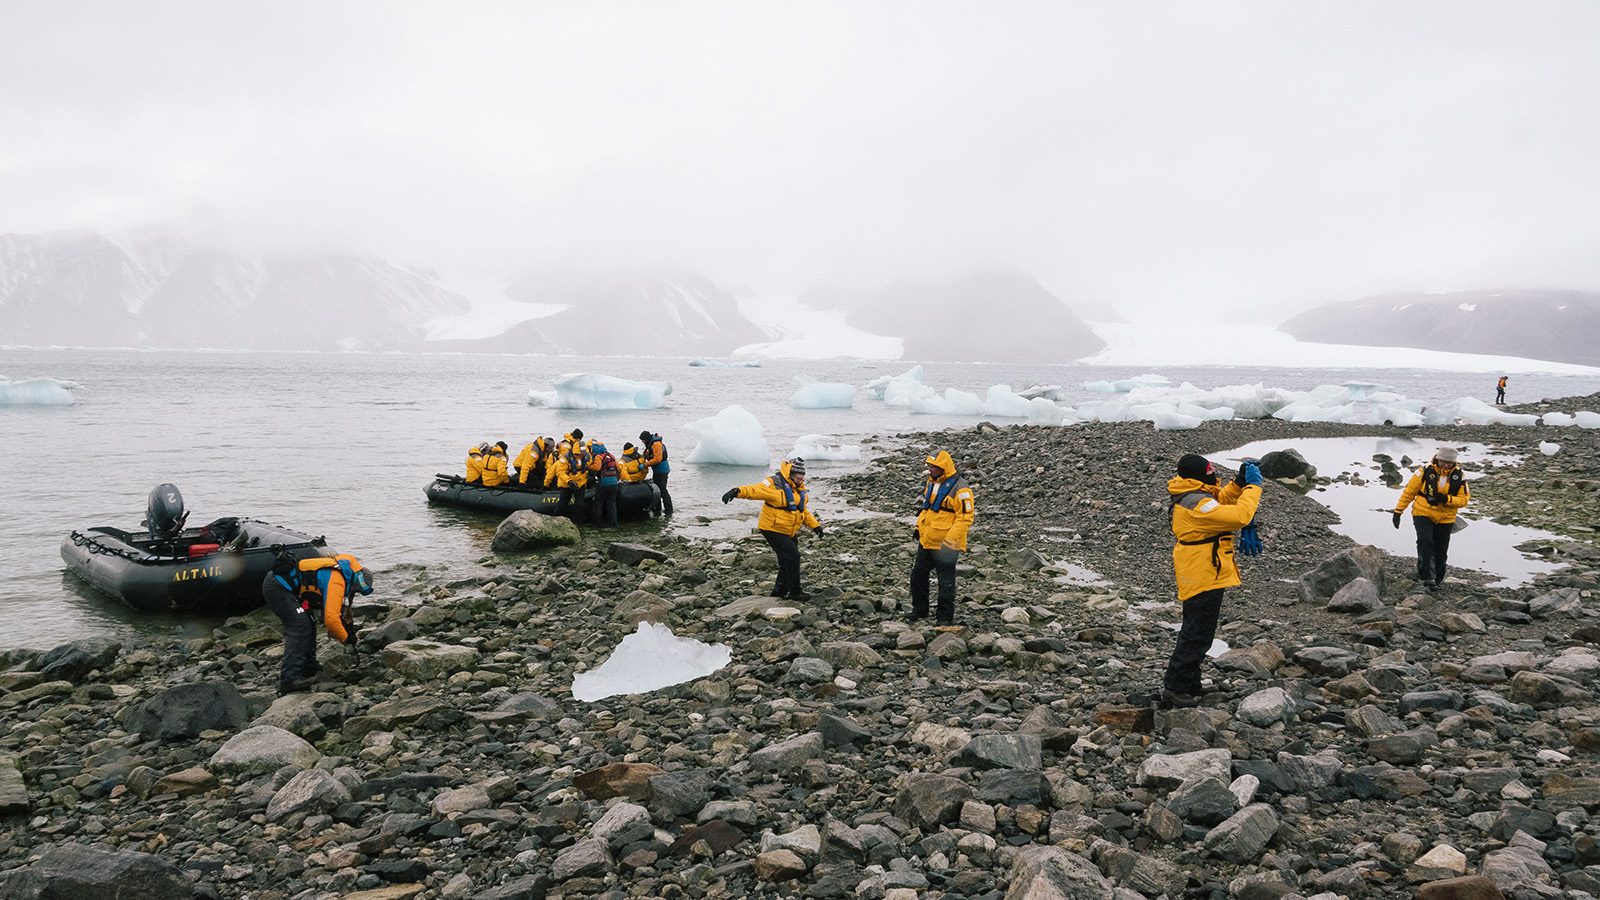 Quark Expeditions guests on a shore landing to view glaciers at Ellesmere Island in Nunavut, which is also home to Baffin Island.